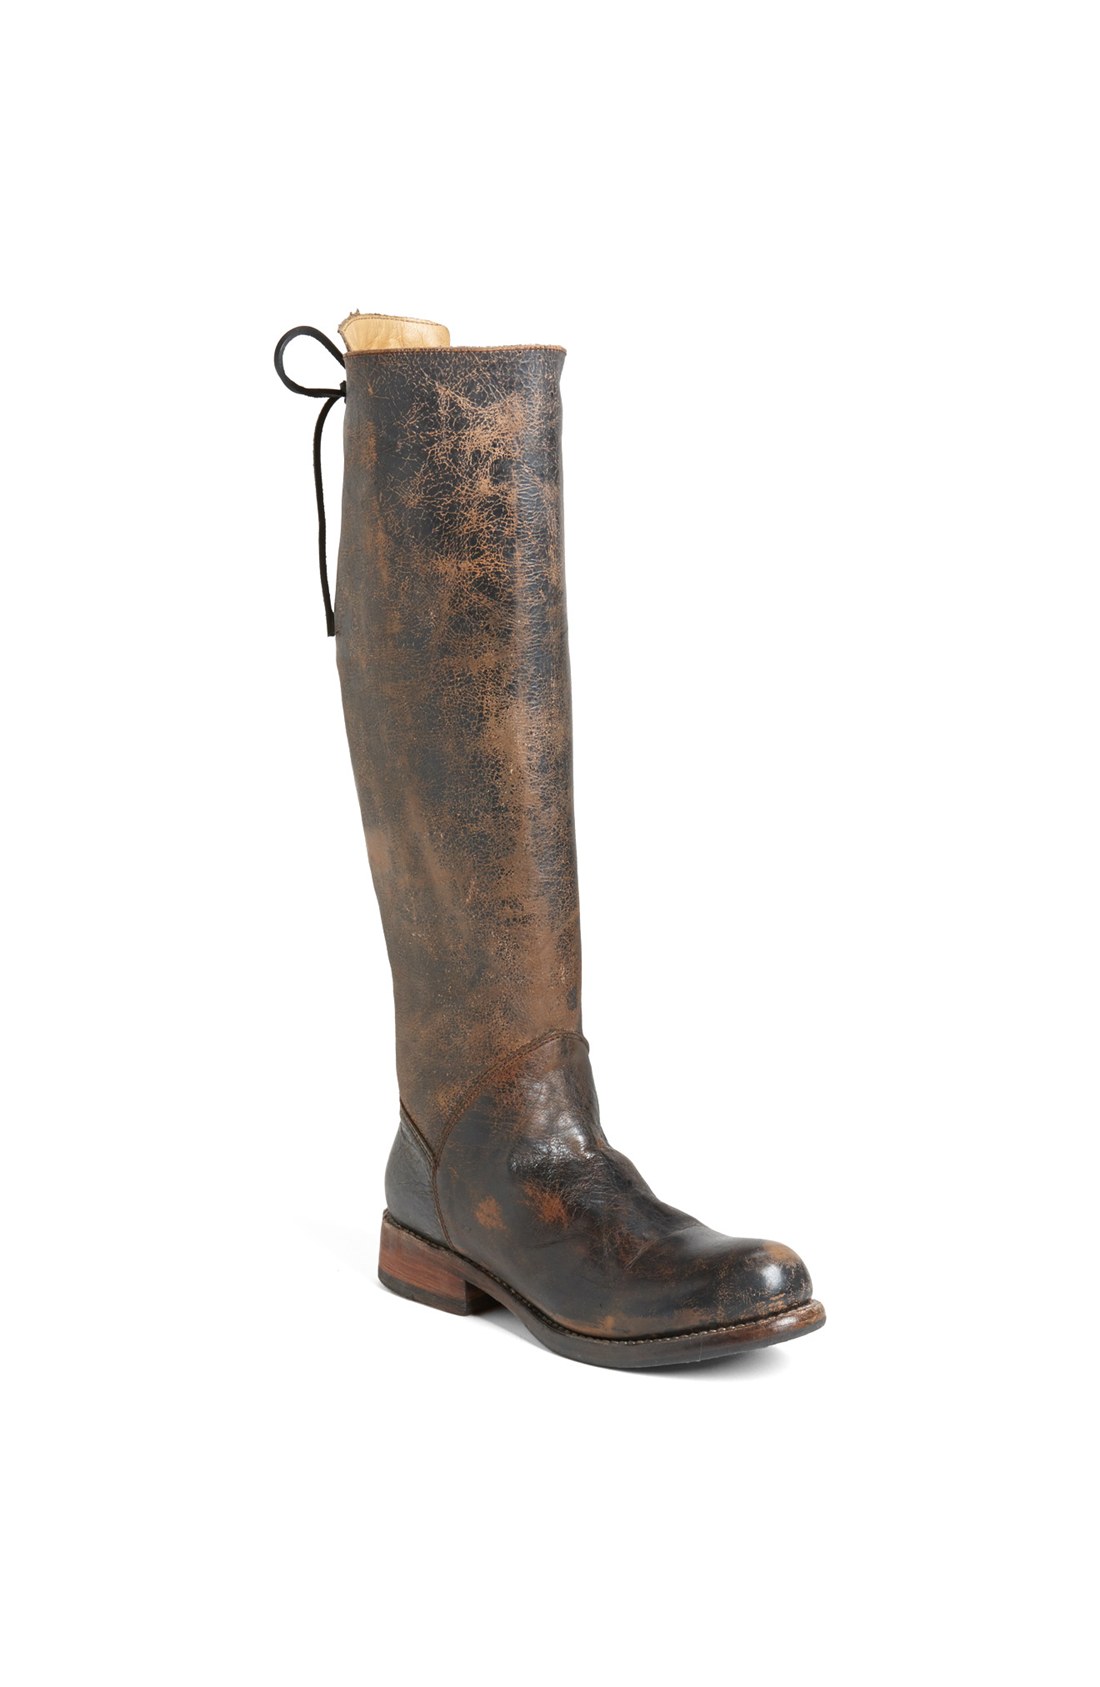 Bed Stu Manchester IIb Tall Distressed Leather Boot in Brown (Black Lux